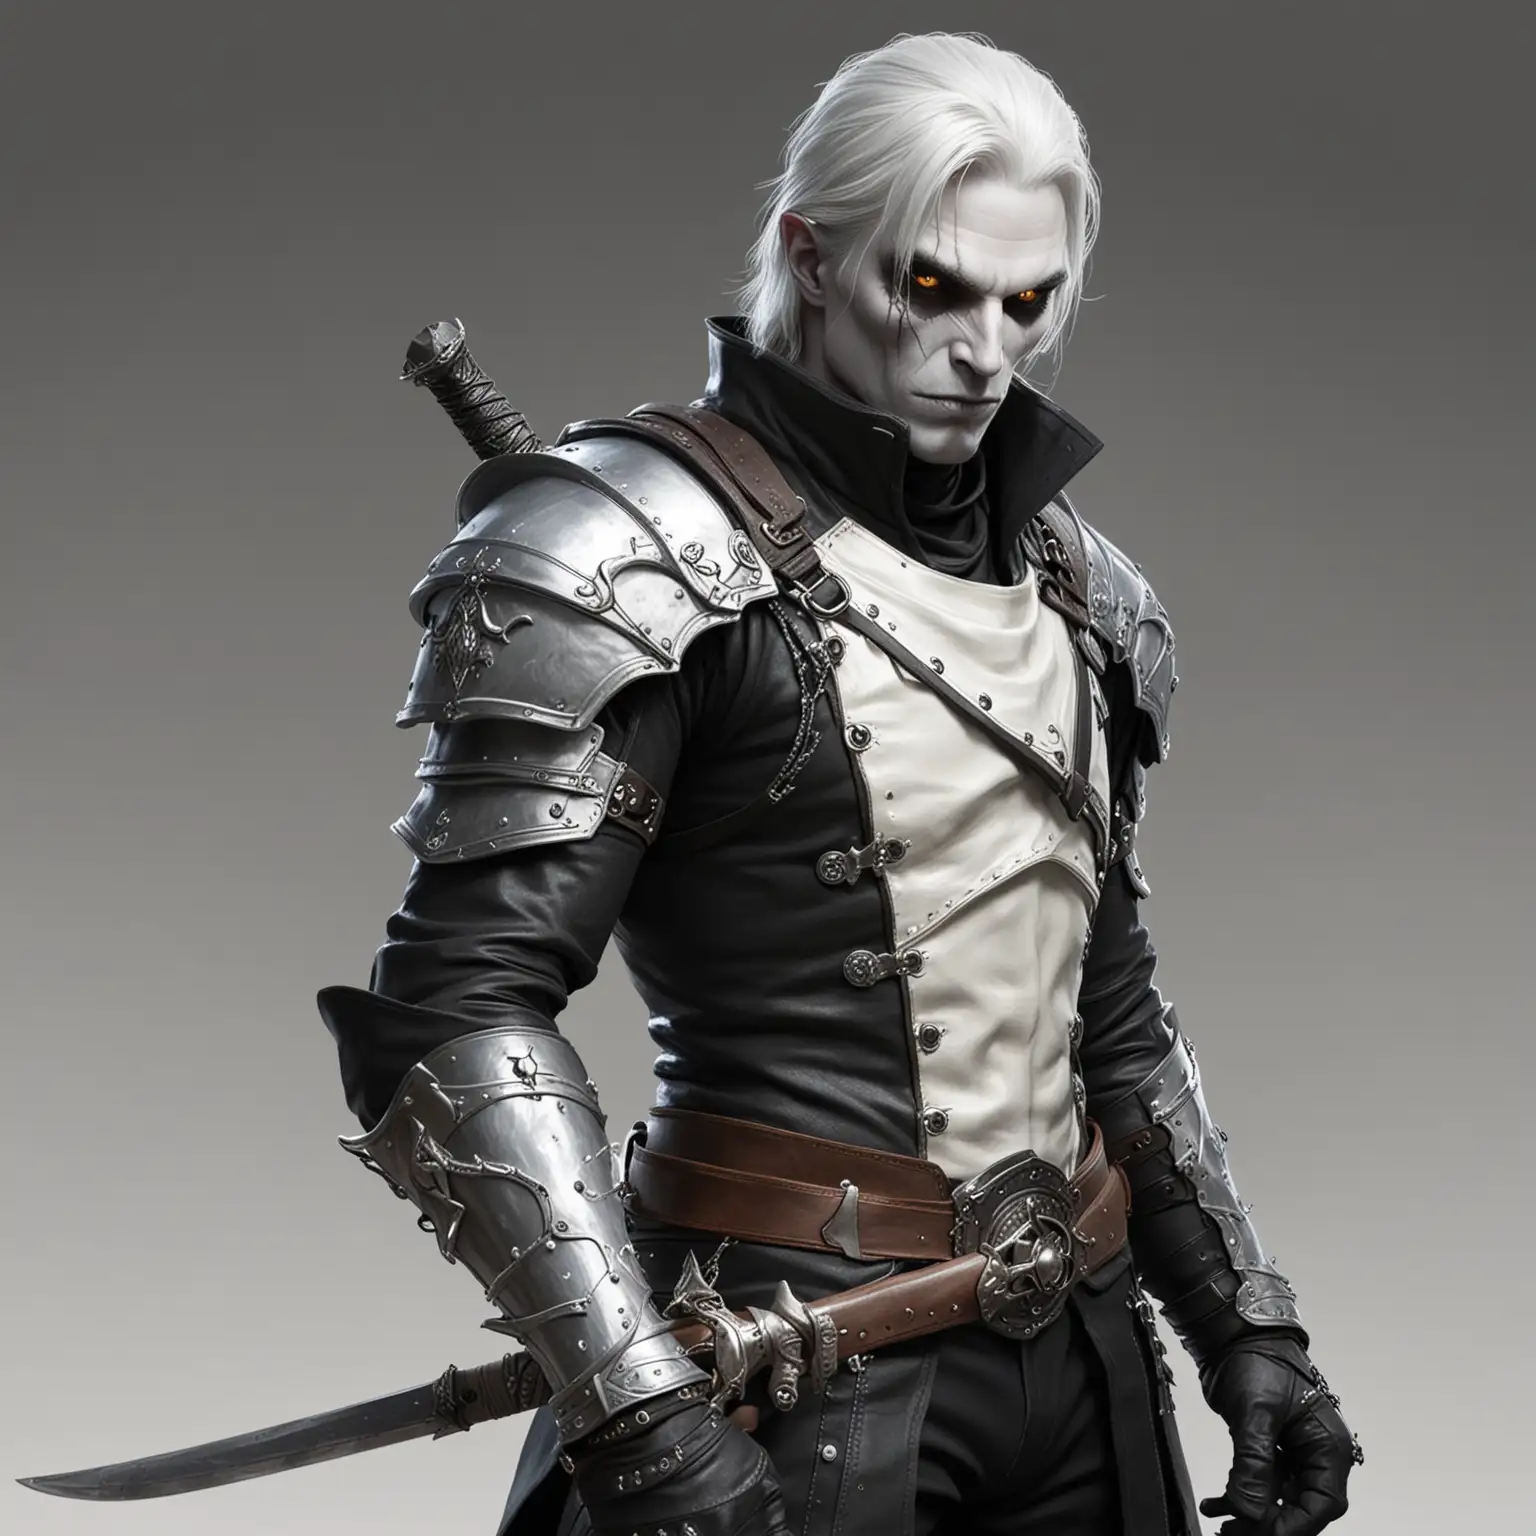 A pale ghoul-like fantasy rogue with a rapier. Character sketch. His skin is pale white and he has dark rings aroundr his eyes. He wears black leather armor.  He has a handsome face.

